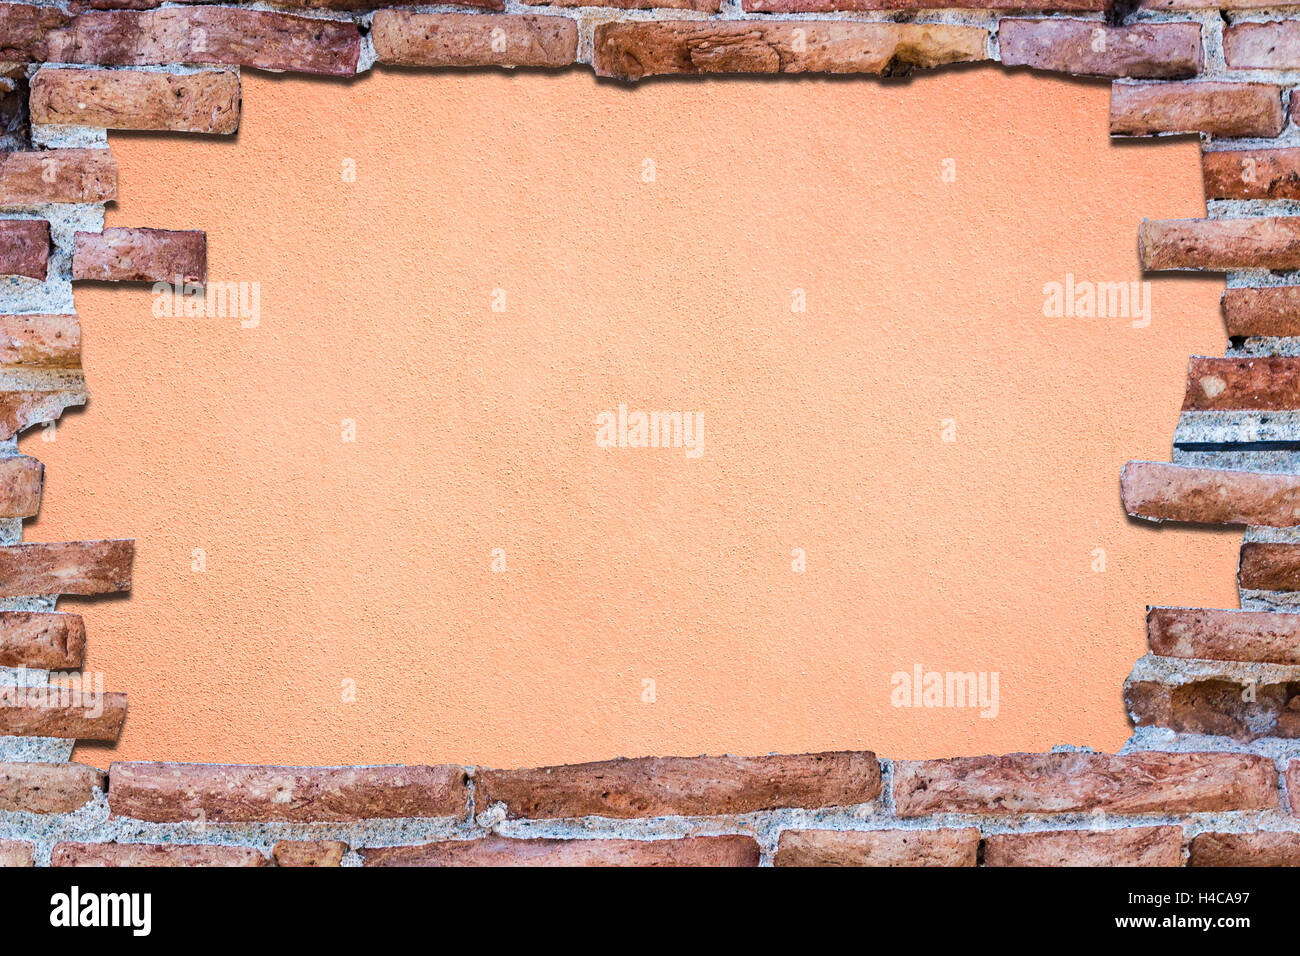 Ancient red brick wall with a hole over a bakground rose. Stock Photo